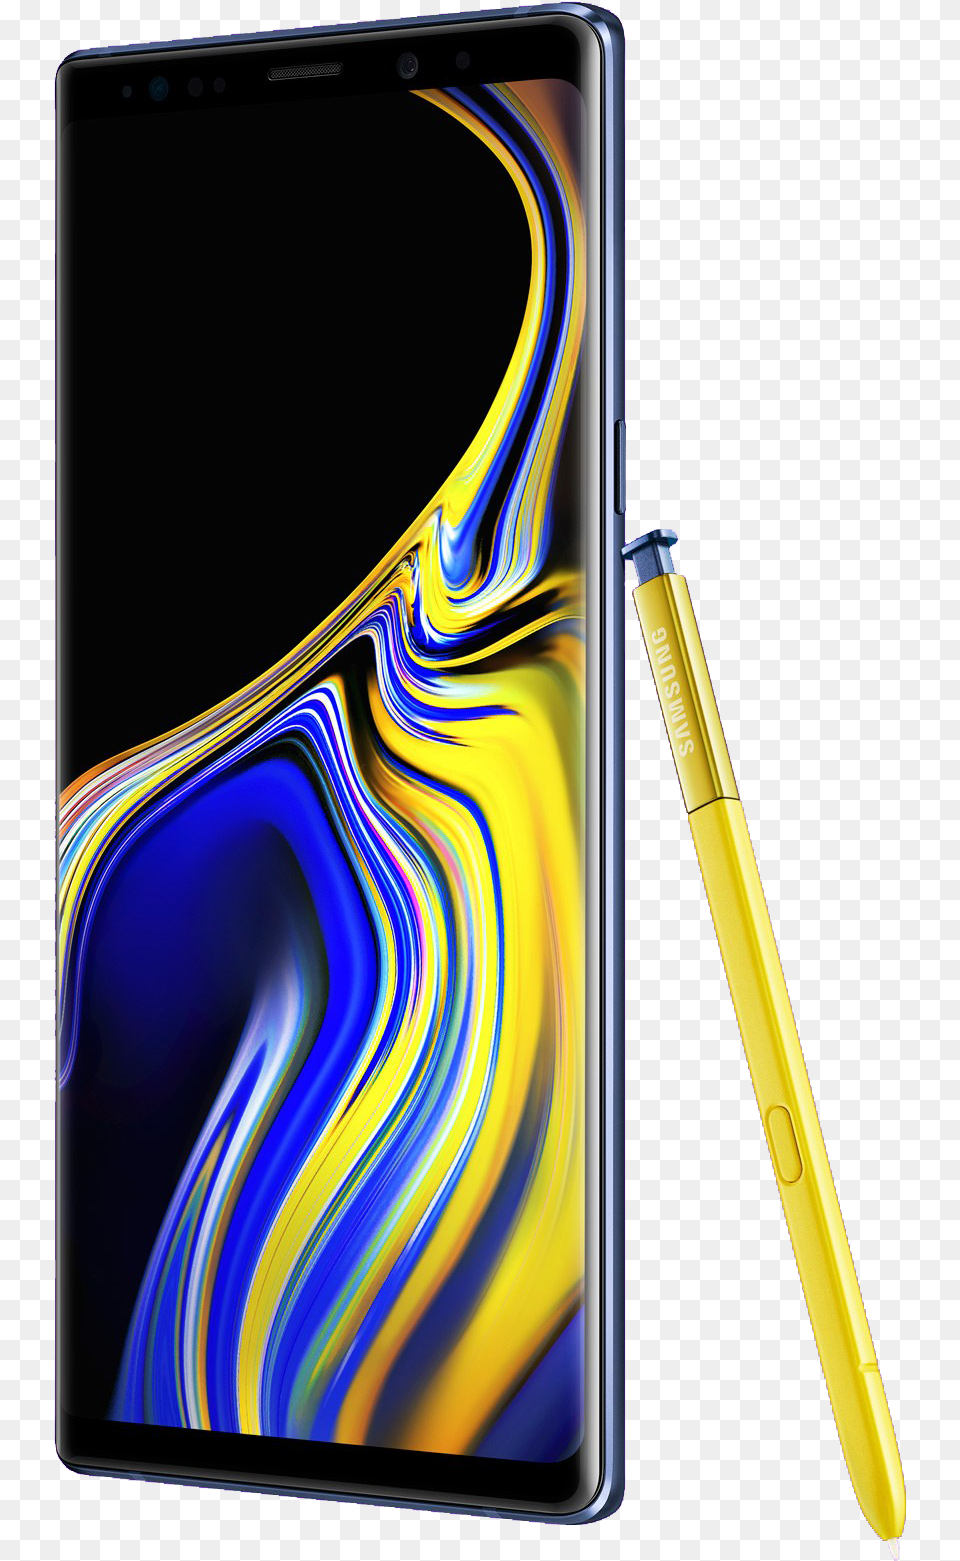 Samsung Galaxy Note 9 2018 Hd Samsung Galaxy Note 9 Stock, Electronics, Mobile Phone, Phone, Pen Png Image